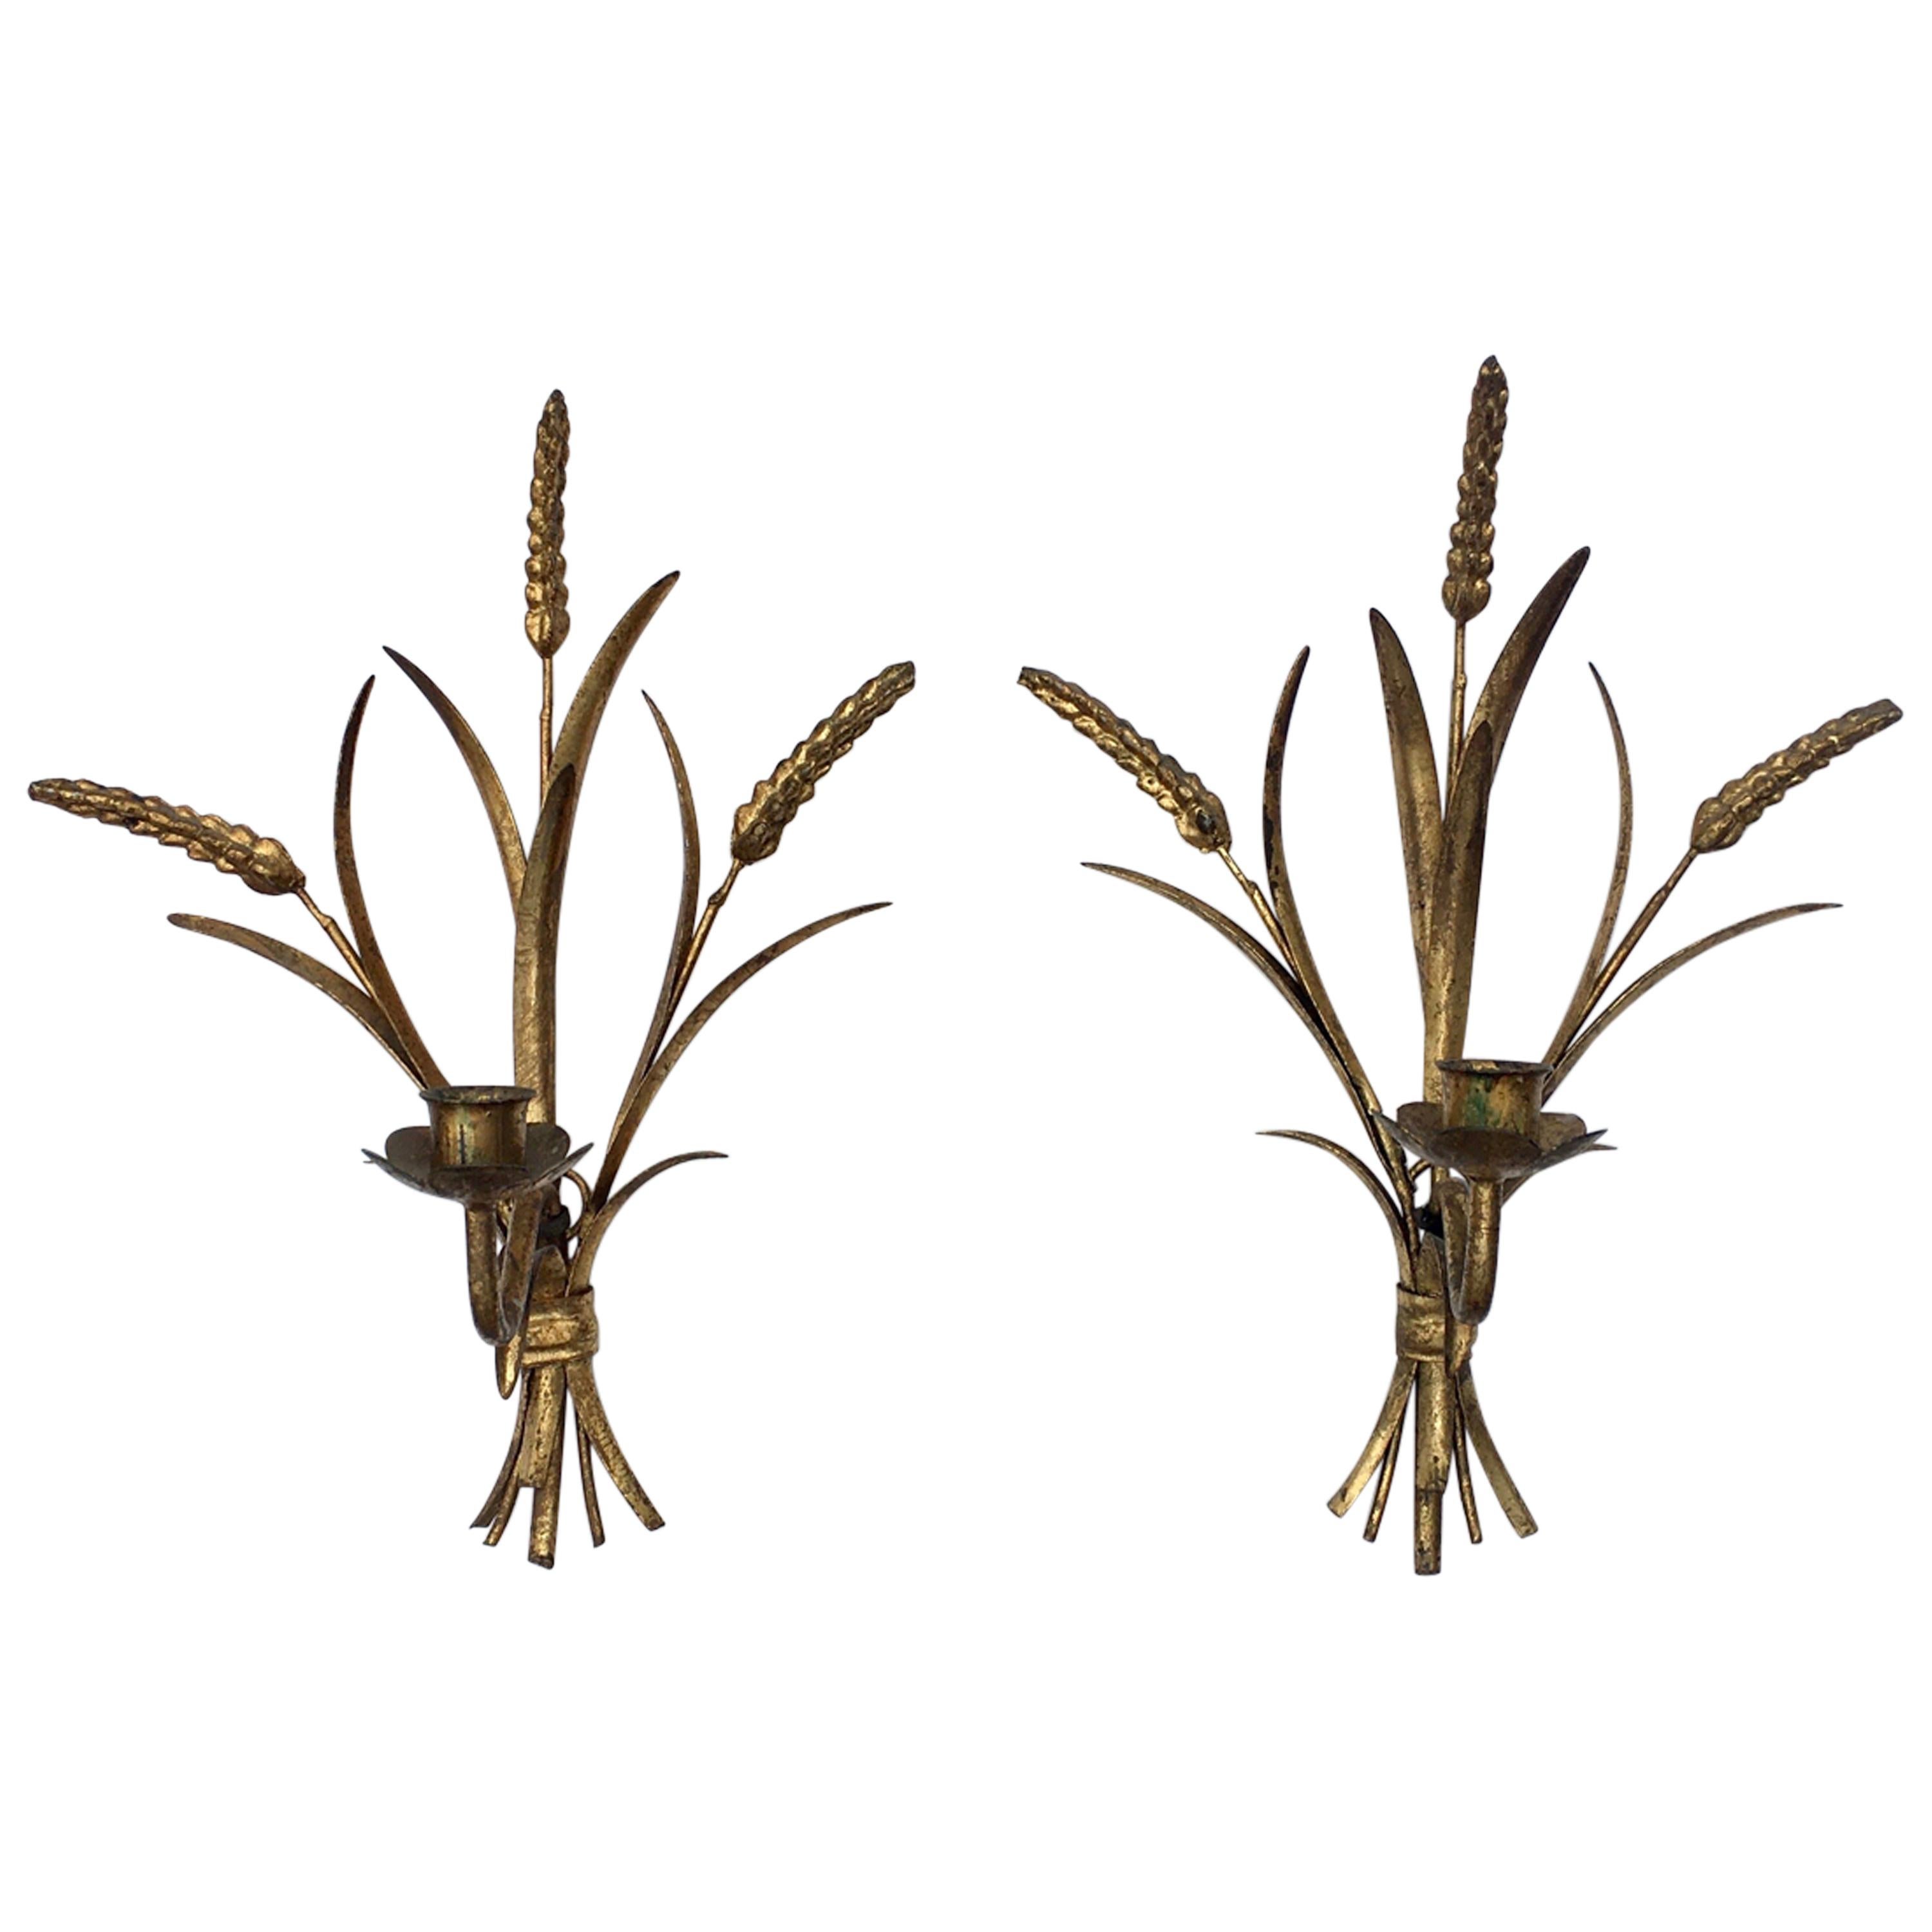 Italian Hollywood Regency Gilt Metal Tole Wheat Candle Wall Sconce, Pair